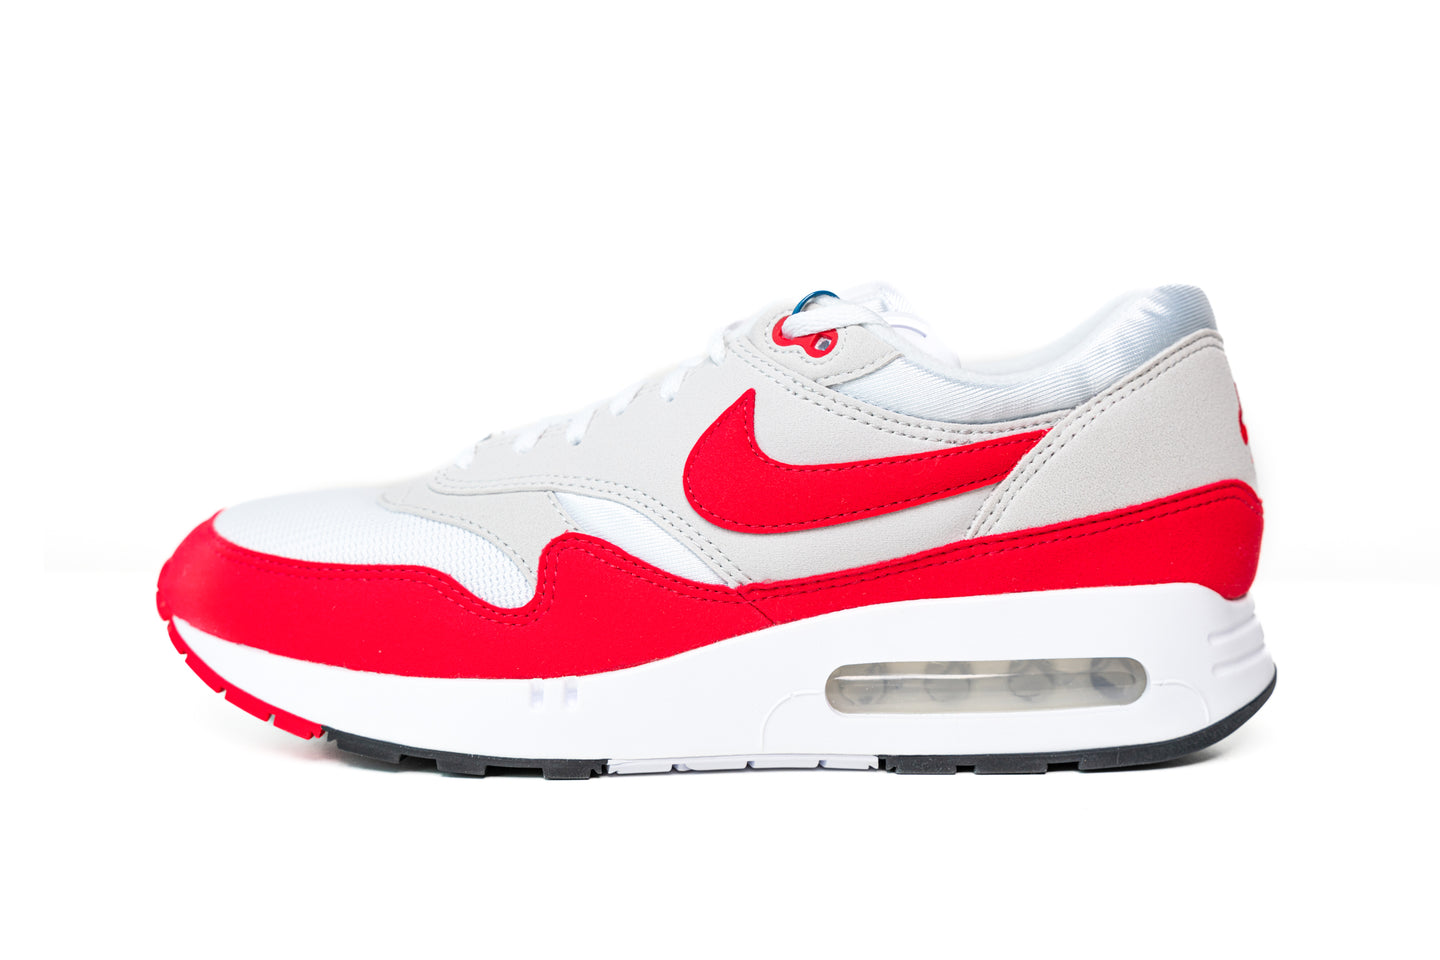 Air Max 1 ‘86 OG ‘Big Bubble-Red’